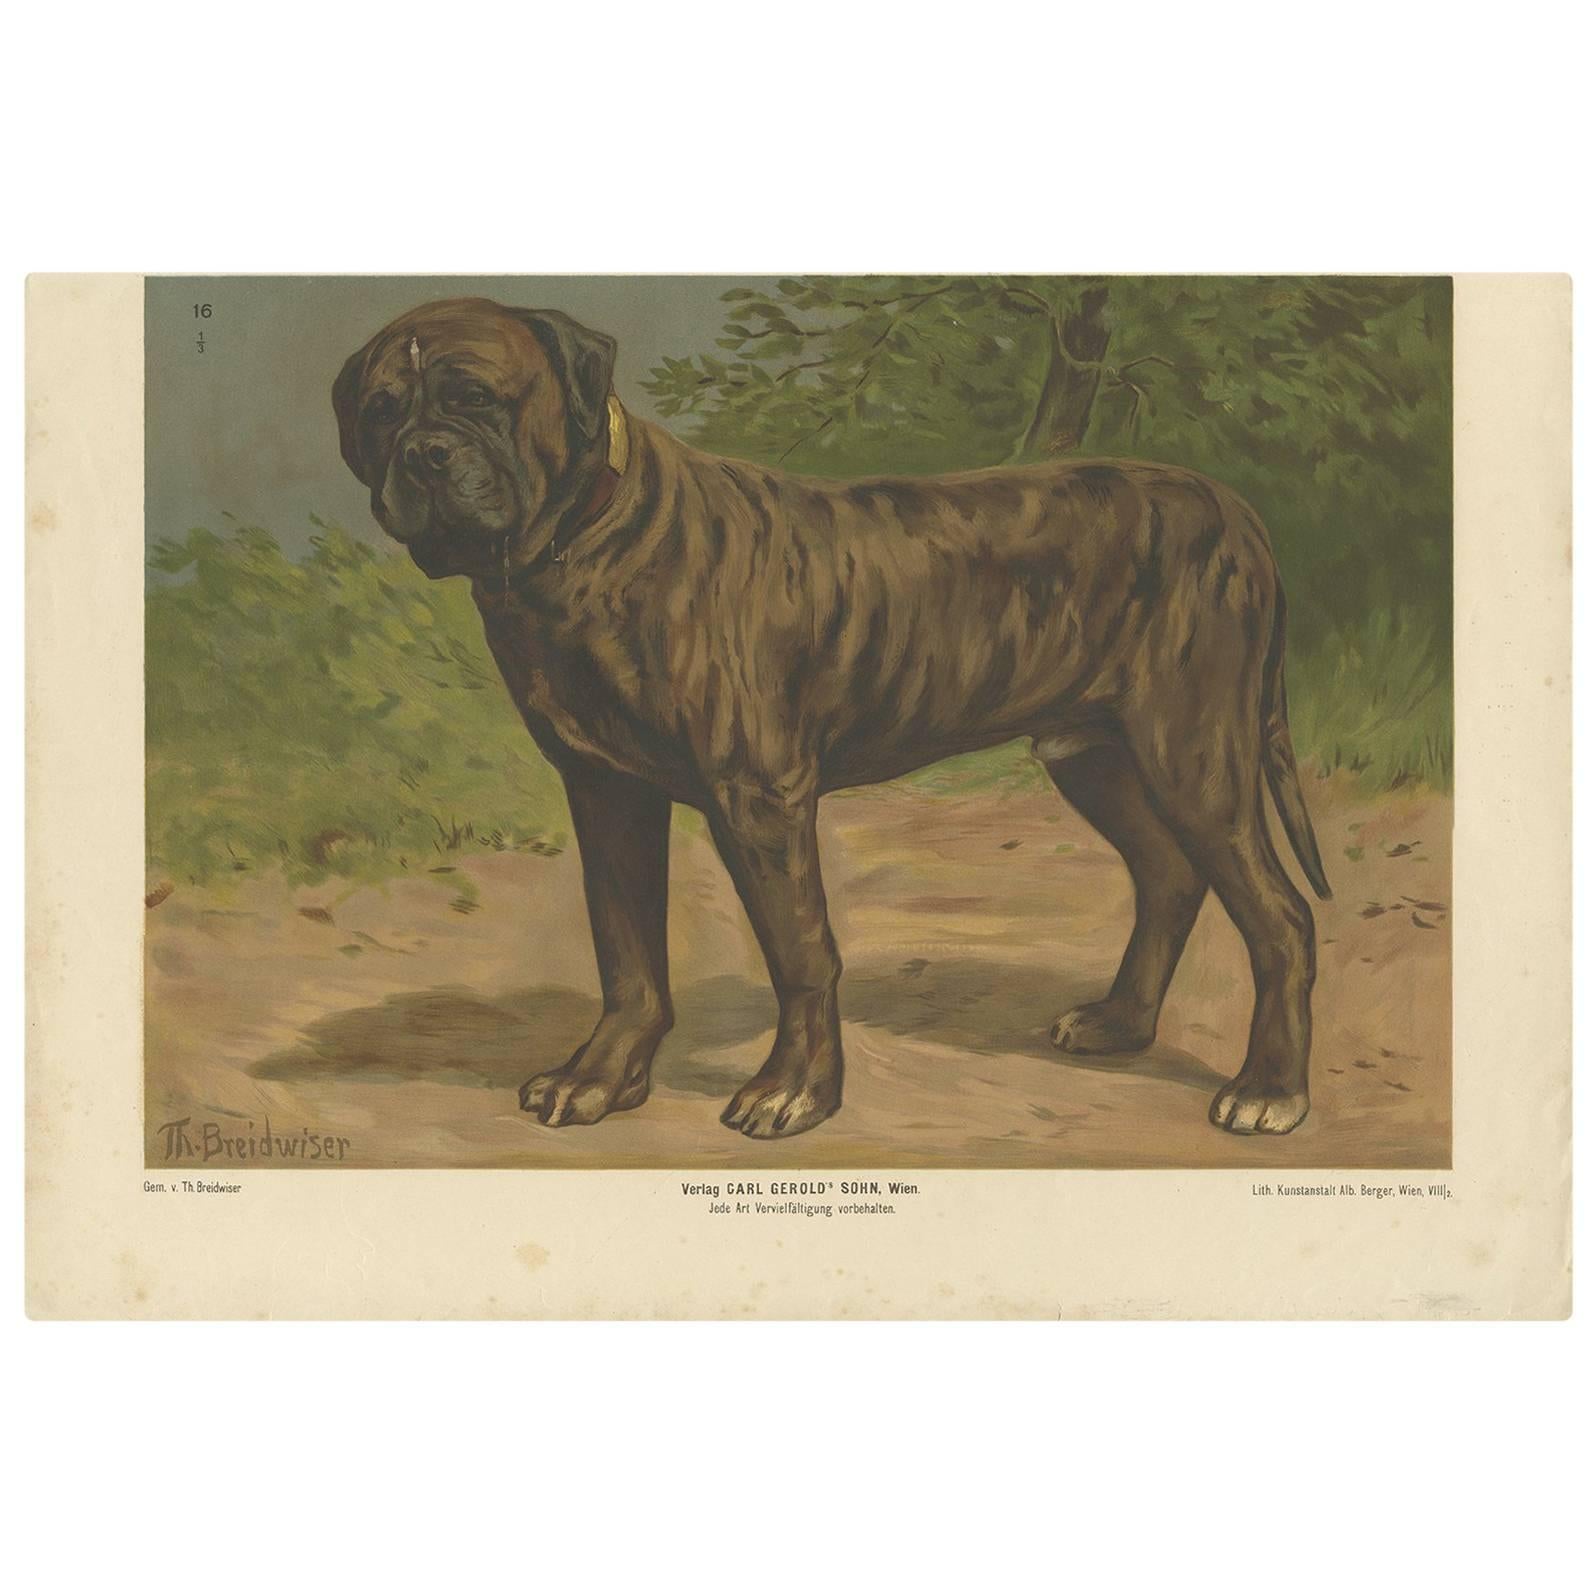 Antique Print of a Boxer Dog by Th. Breidwiser, 1879